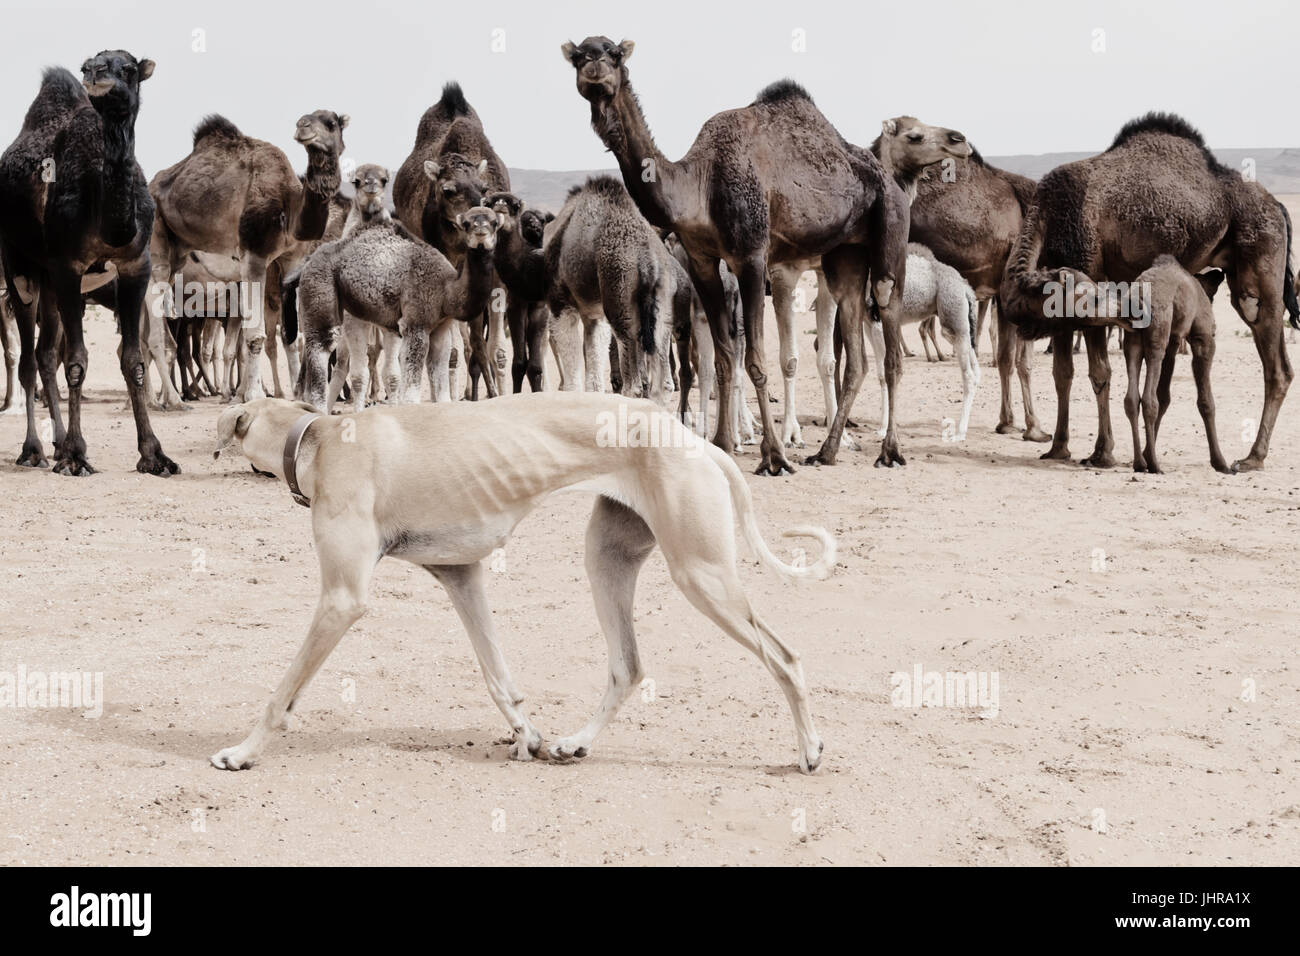 A Sloughi (Arabian greyhound) herds a group of dromedaries (camels) in the desert of Morocco. Stock Photo